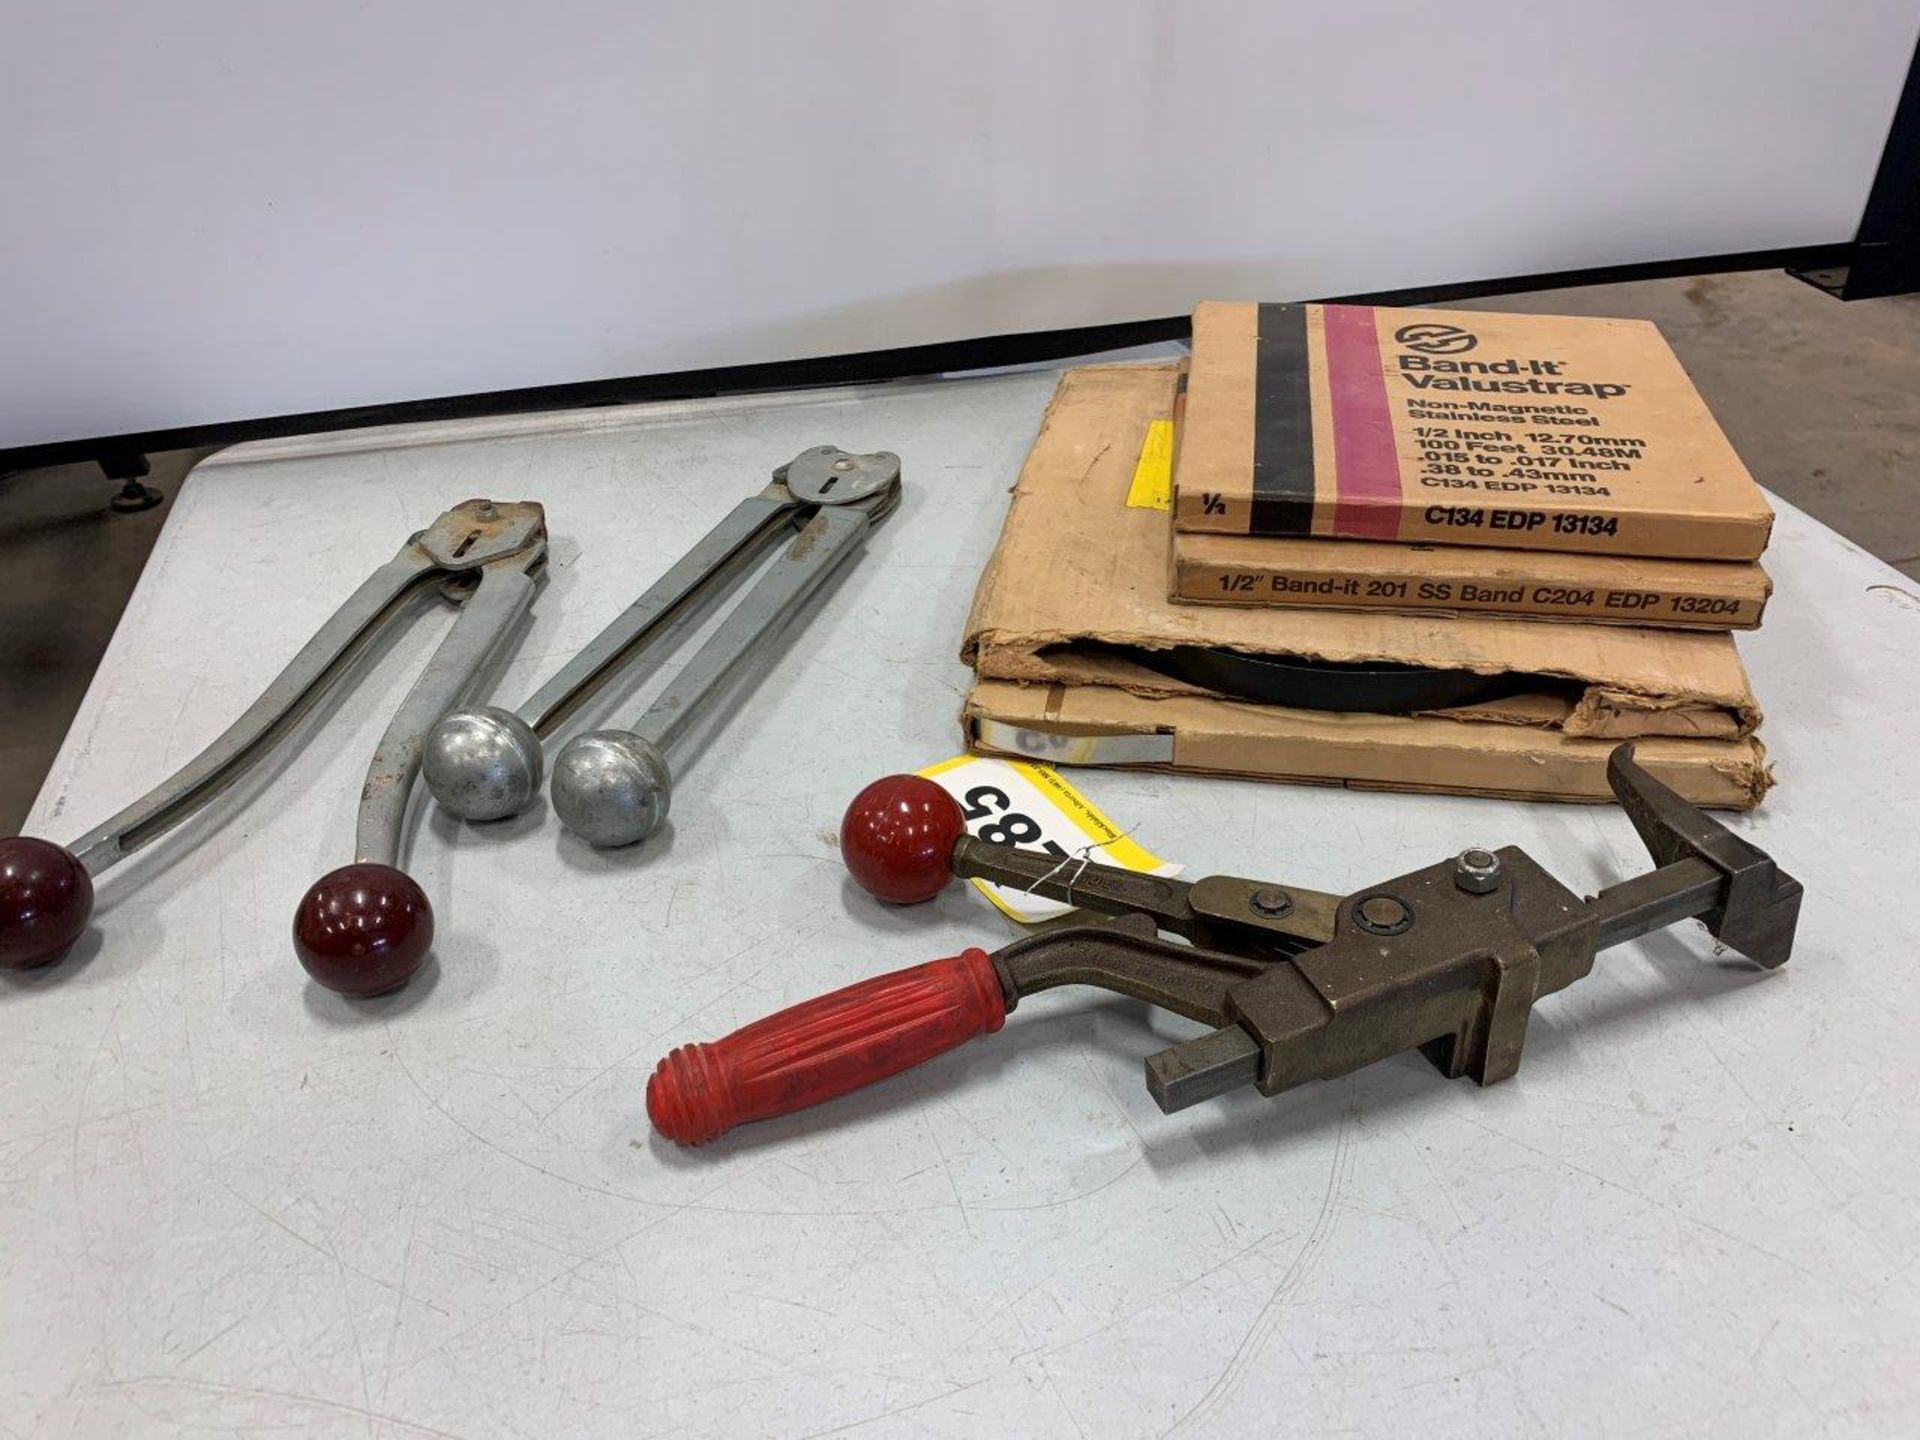 ASSORTED BANDING TOOLS AND BANDING